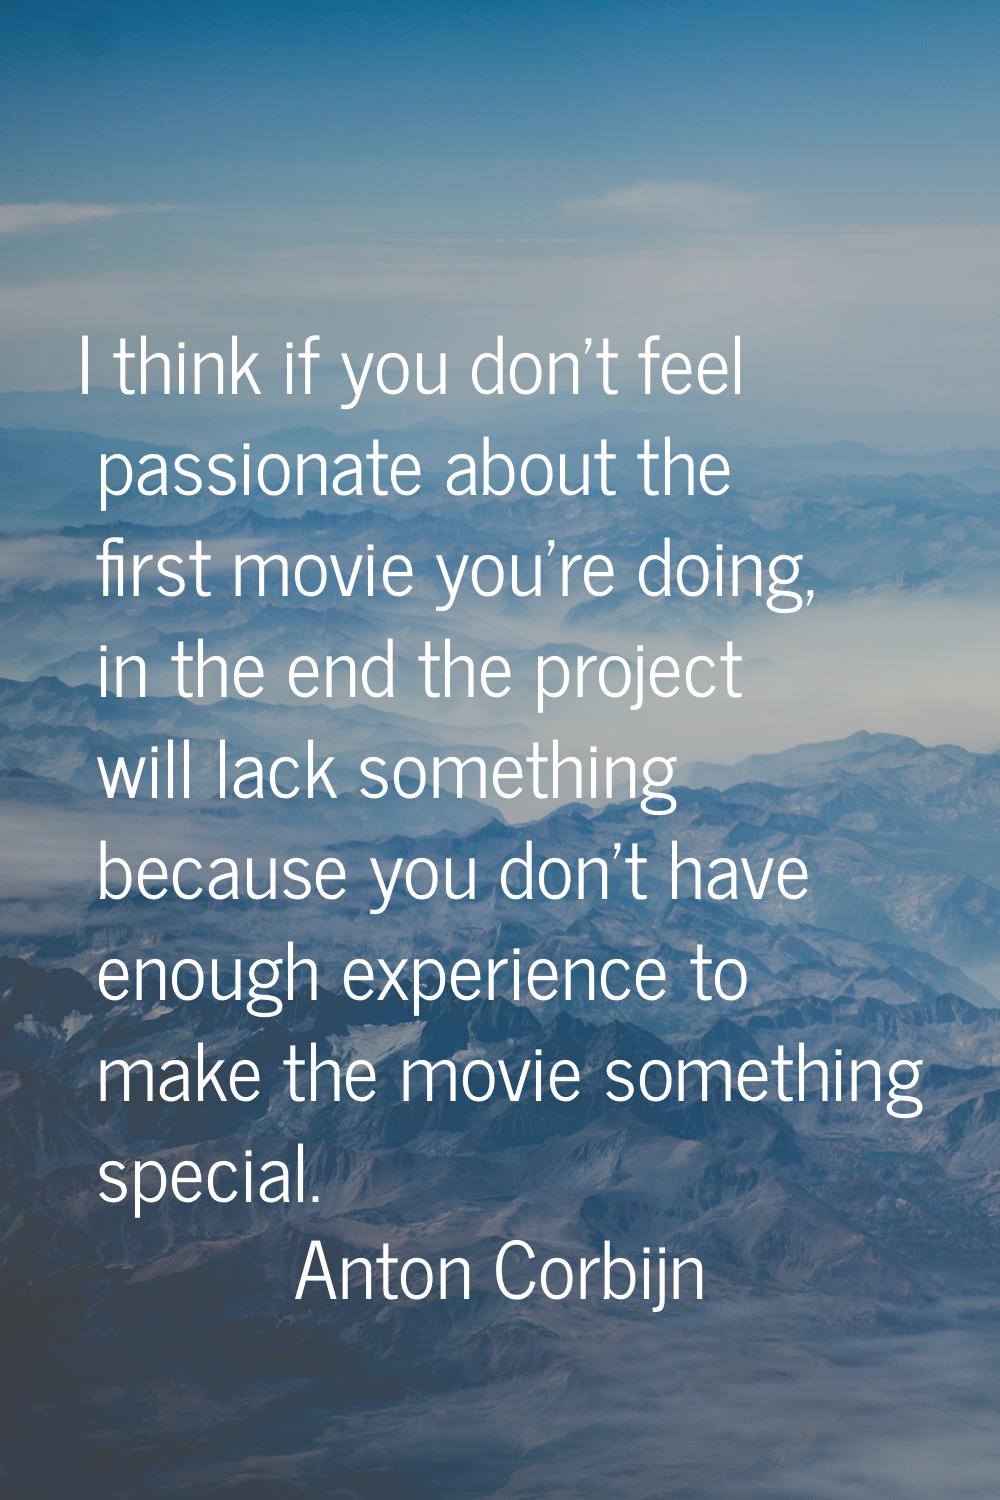 I think if you don't feel passionate about the first movie you're doing, in the end the project wil